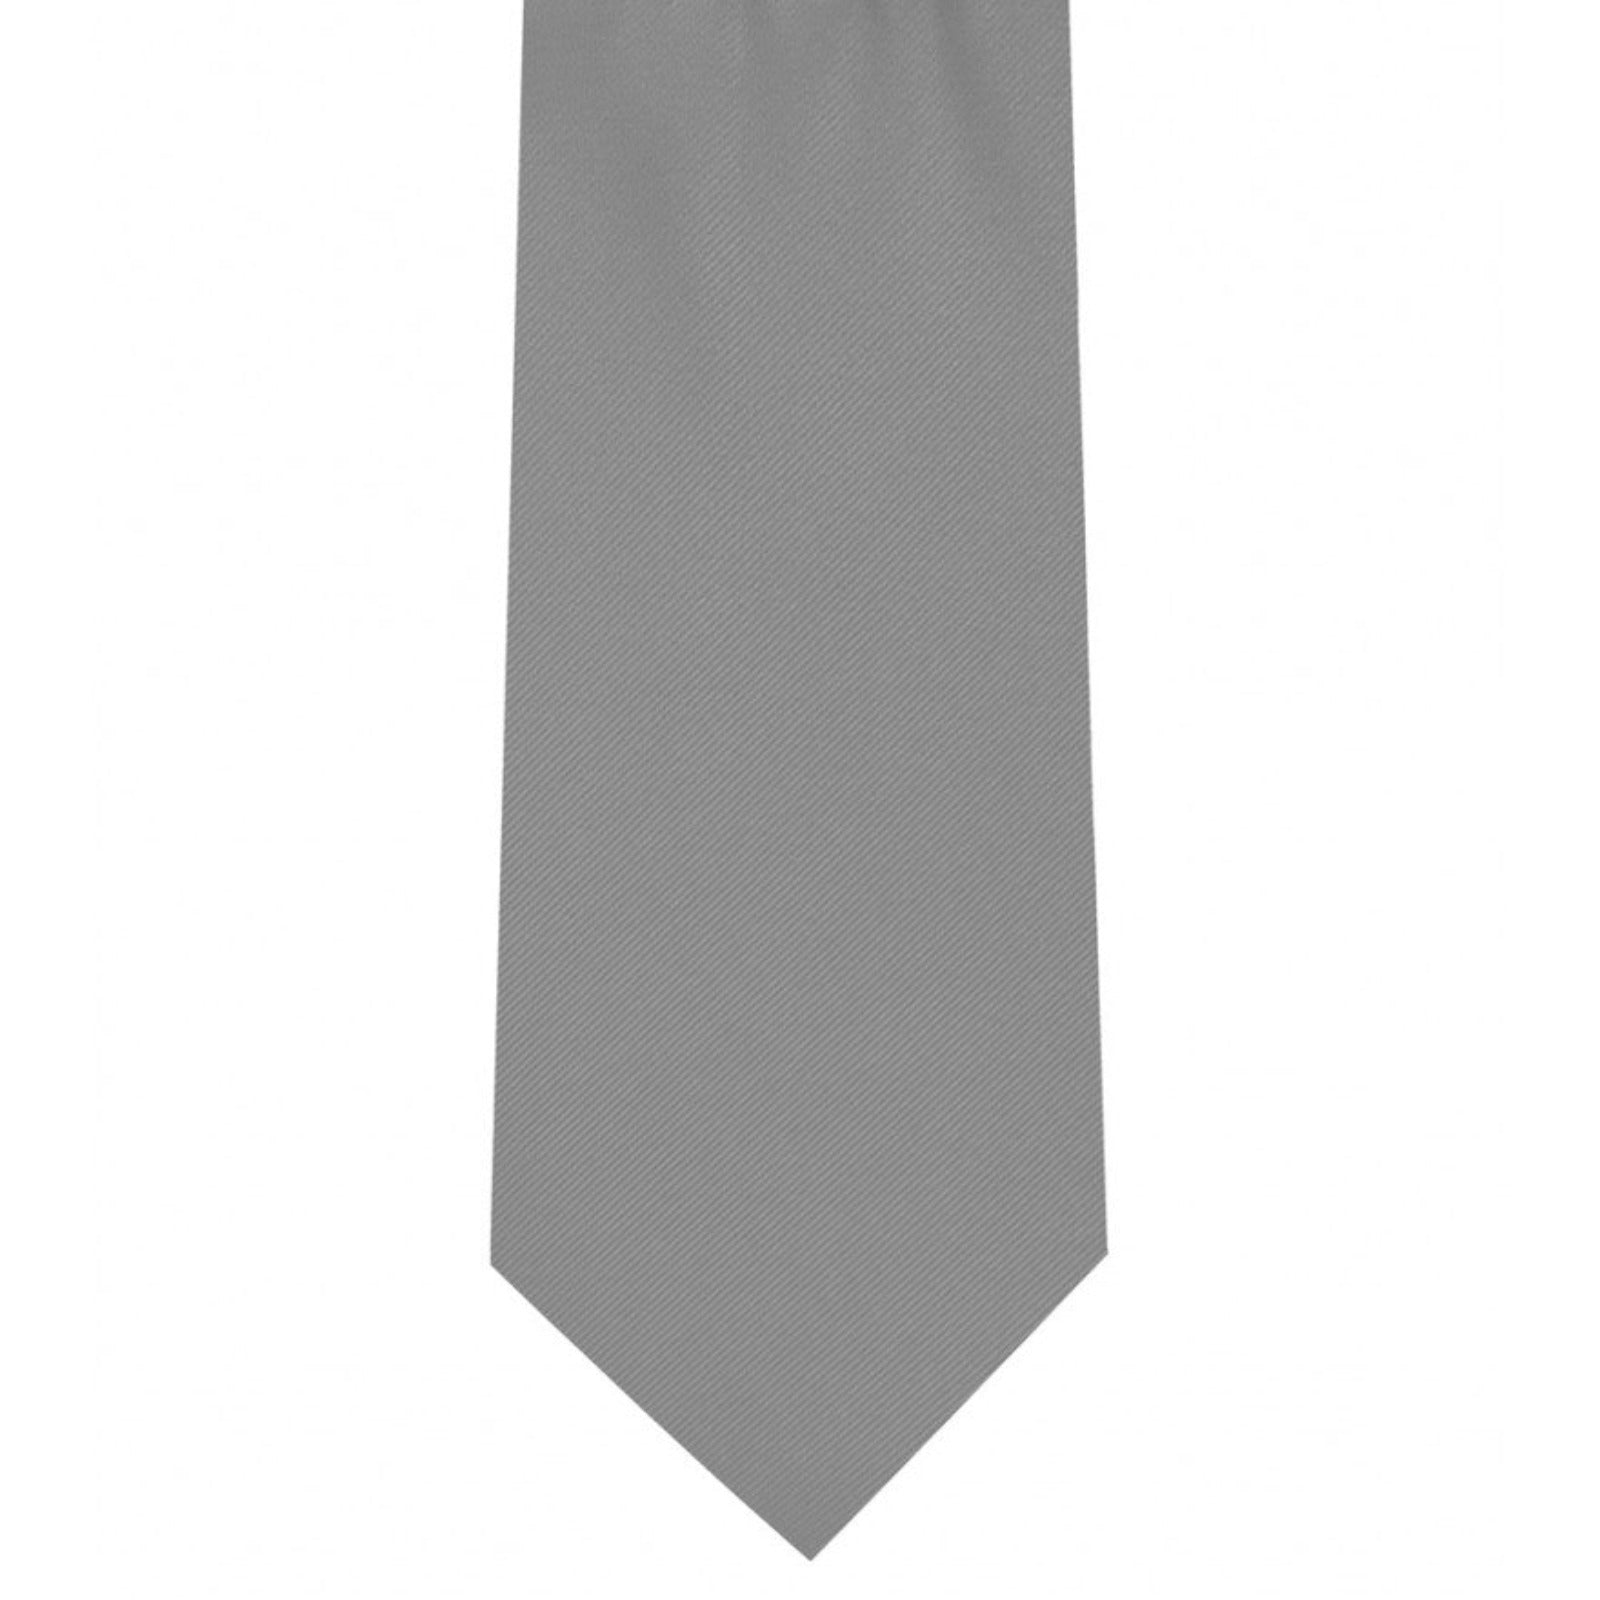 Classic Dark Silver Tie Ultra Skinny tie width 2.25 inches With Matching Pocket Square | KCT Menswear